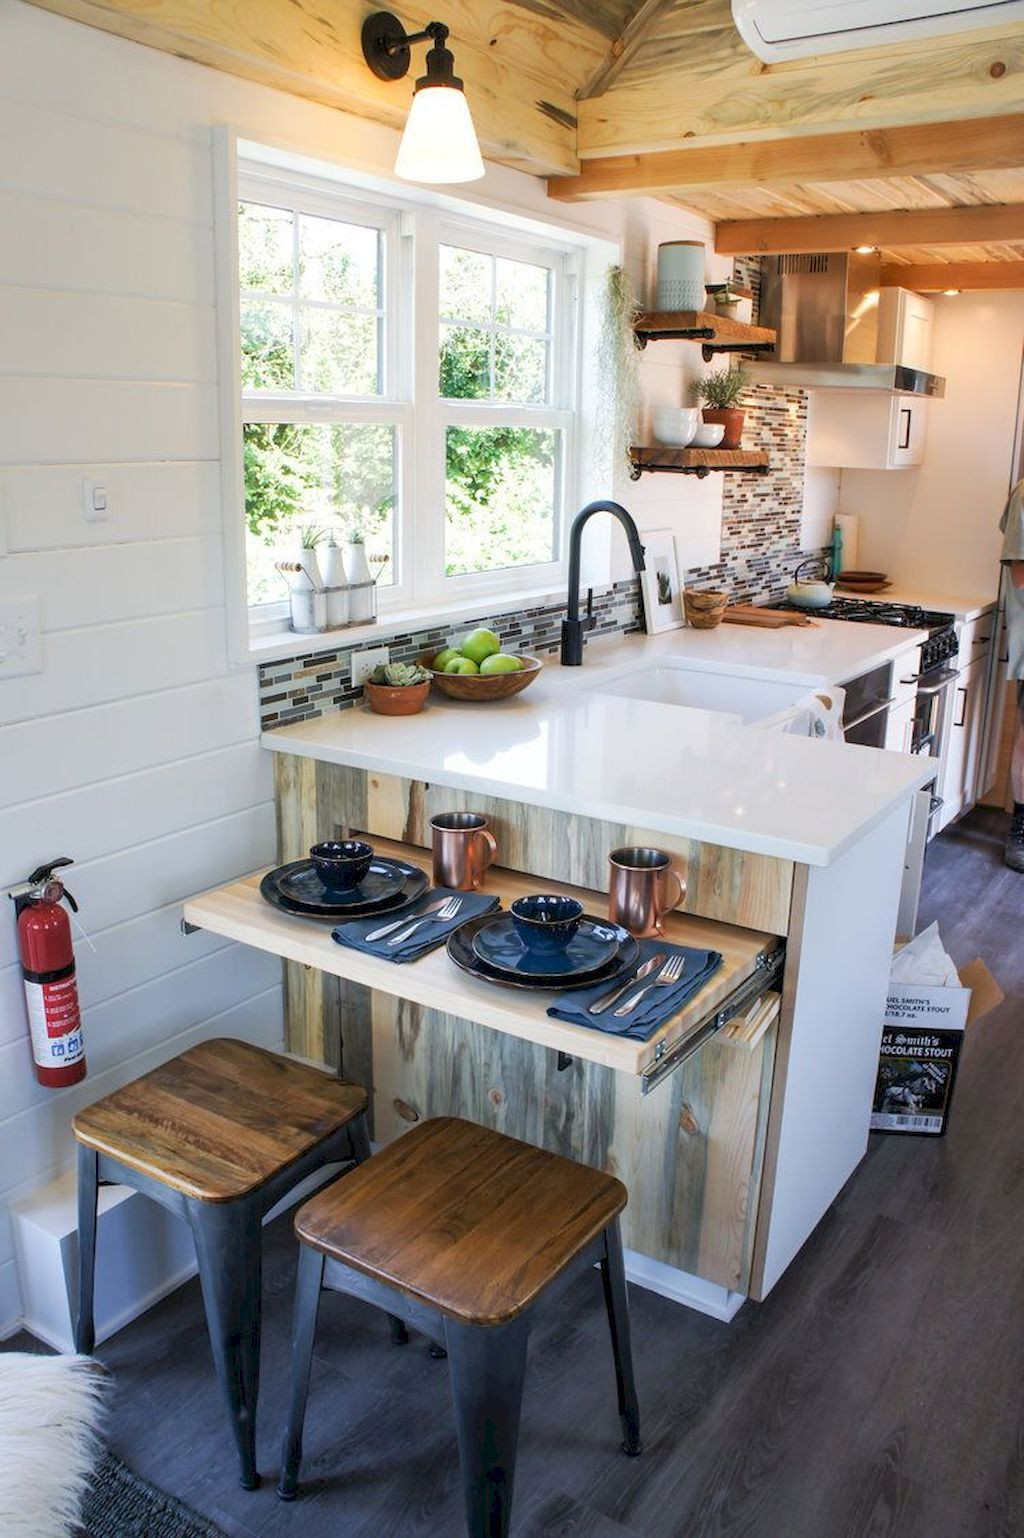 Small House Kitchens
 The 11 Tiny House Kitchens That ll Make You Rethink Big